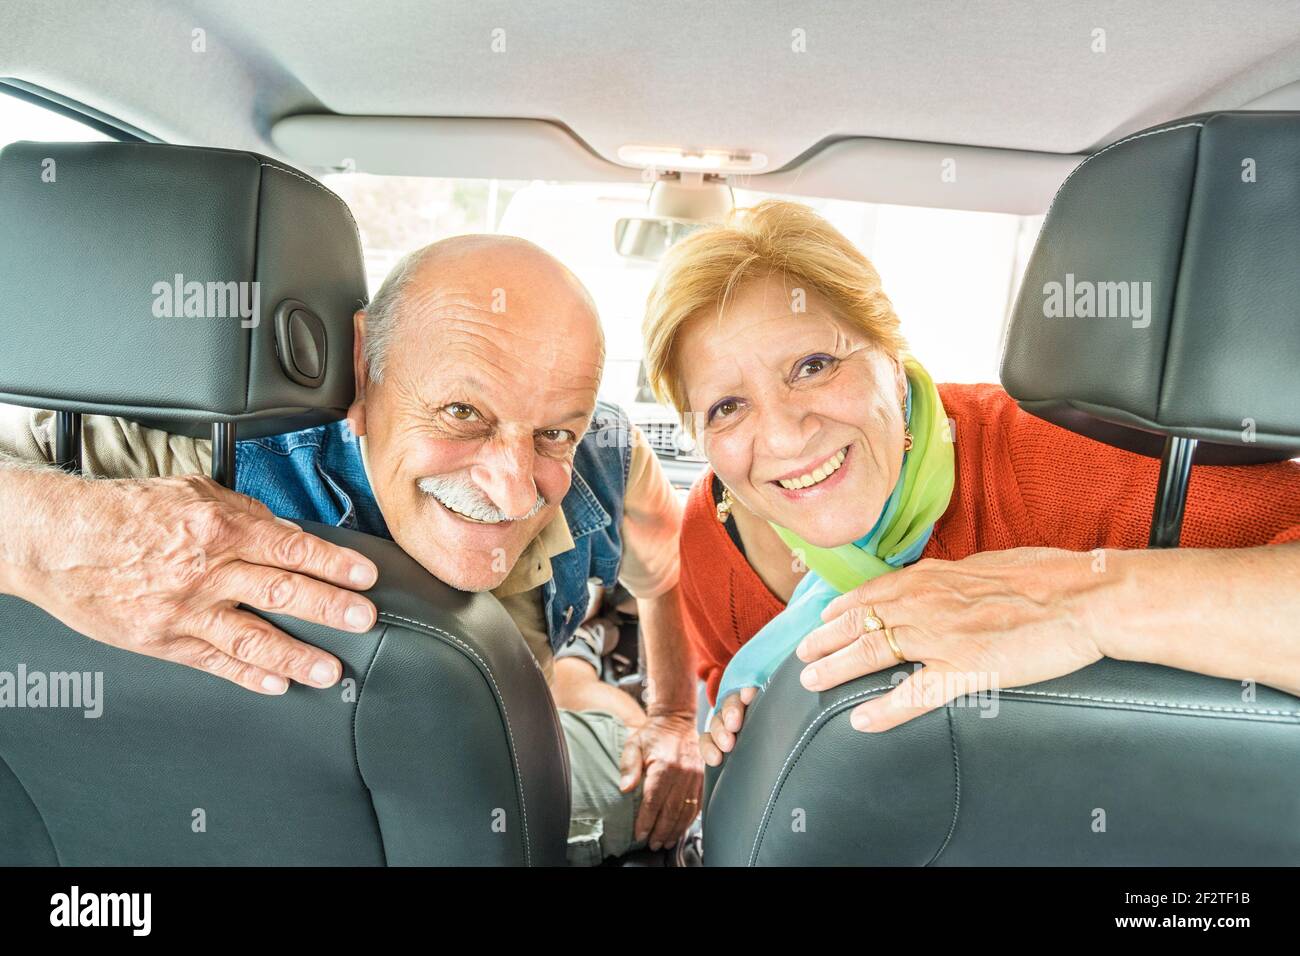 Happy senior couple ready for driving car on journey trip - Concept of joyful active elderly with retired man and woman enjoying their best years Stock Photo